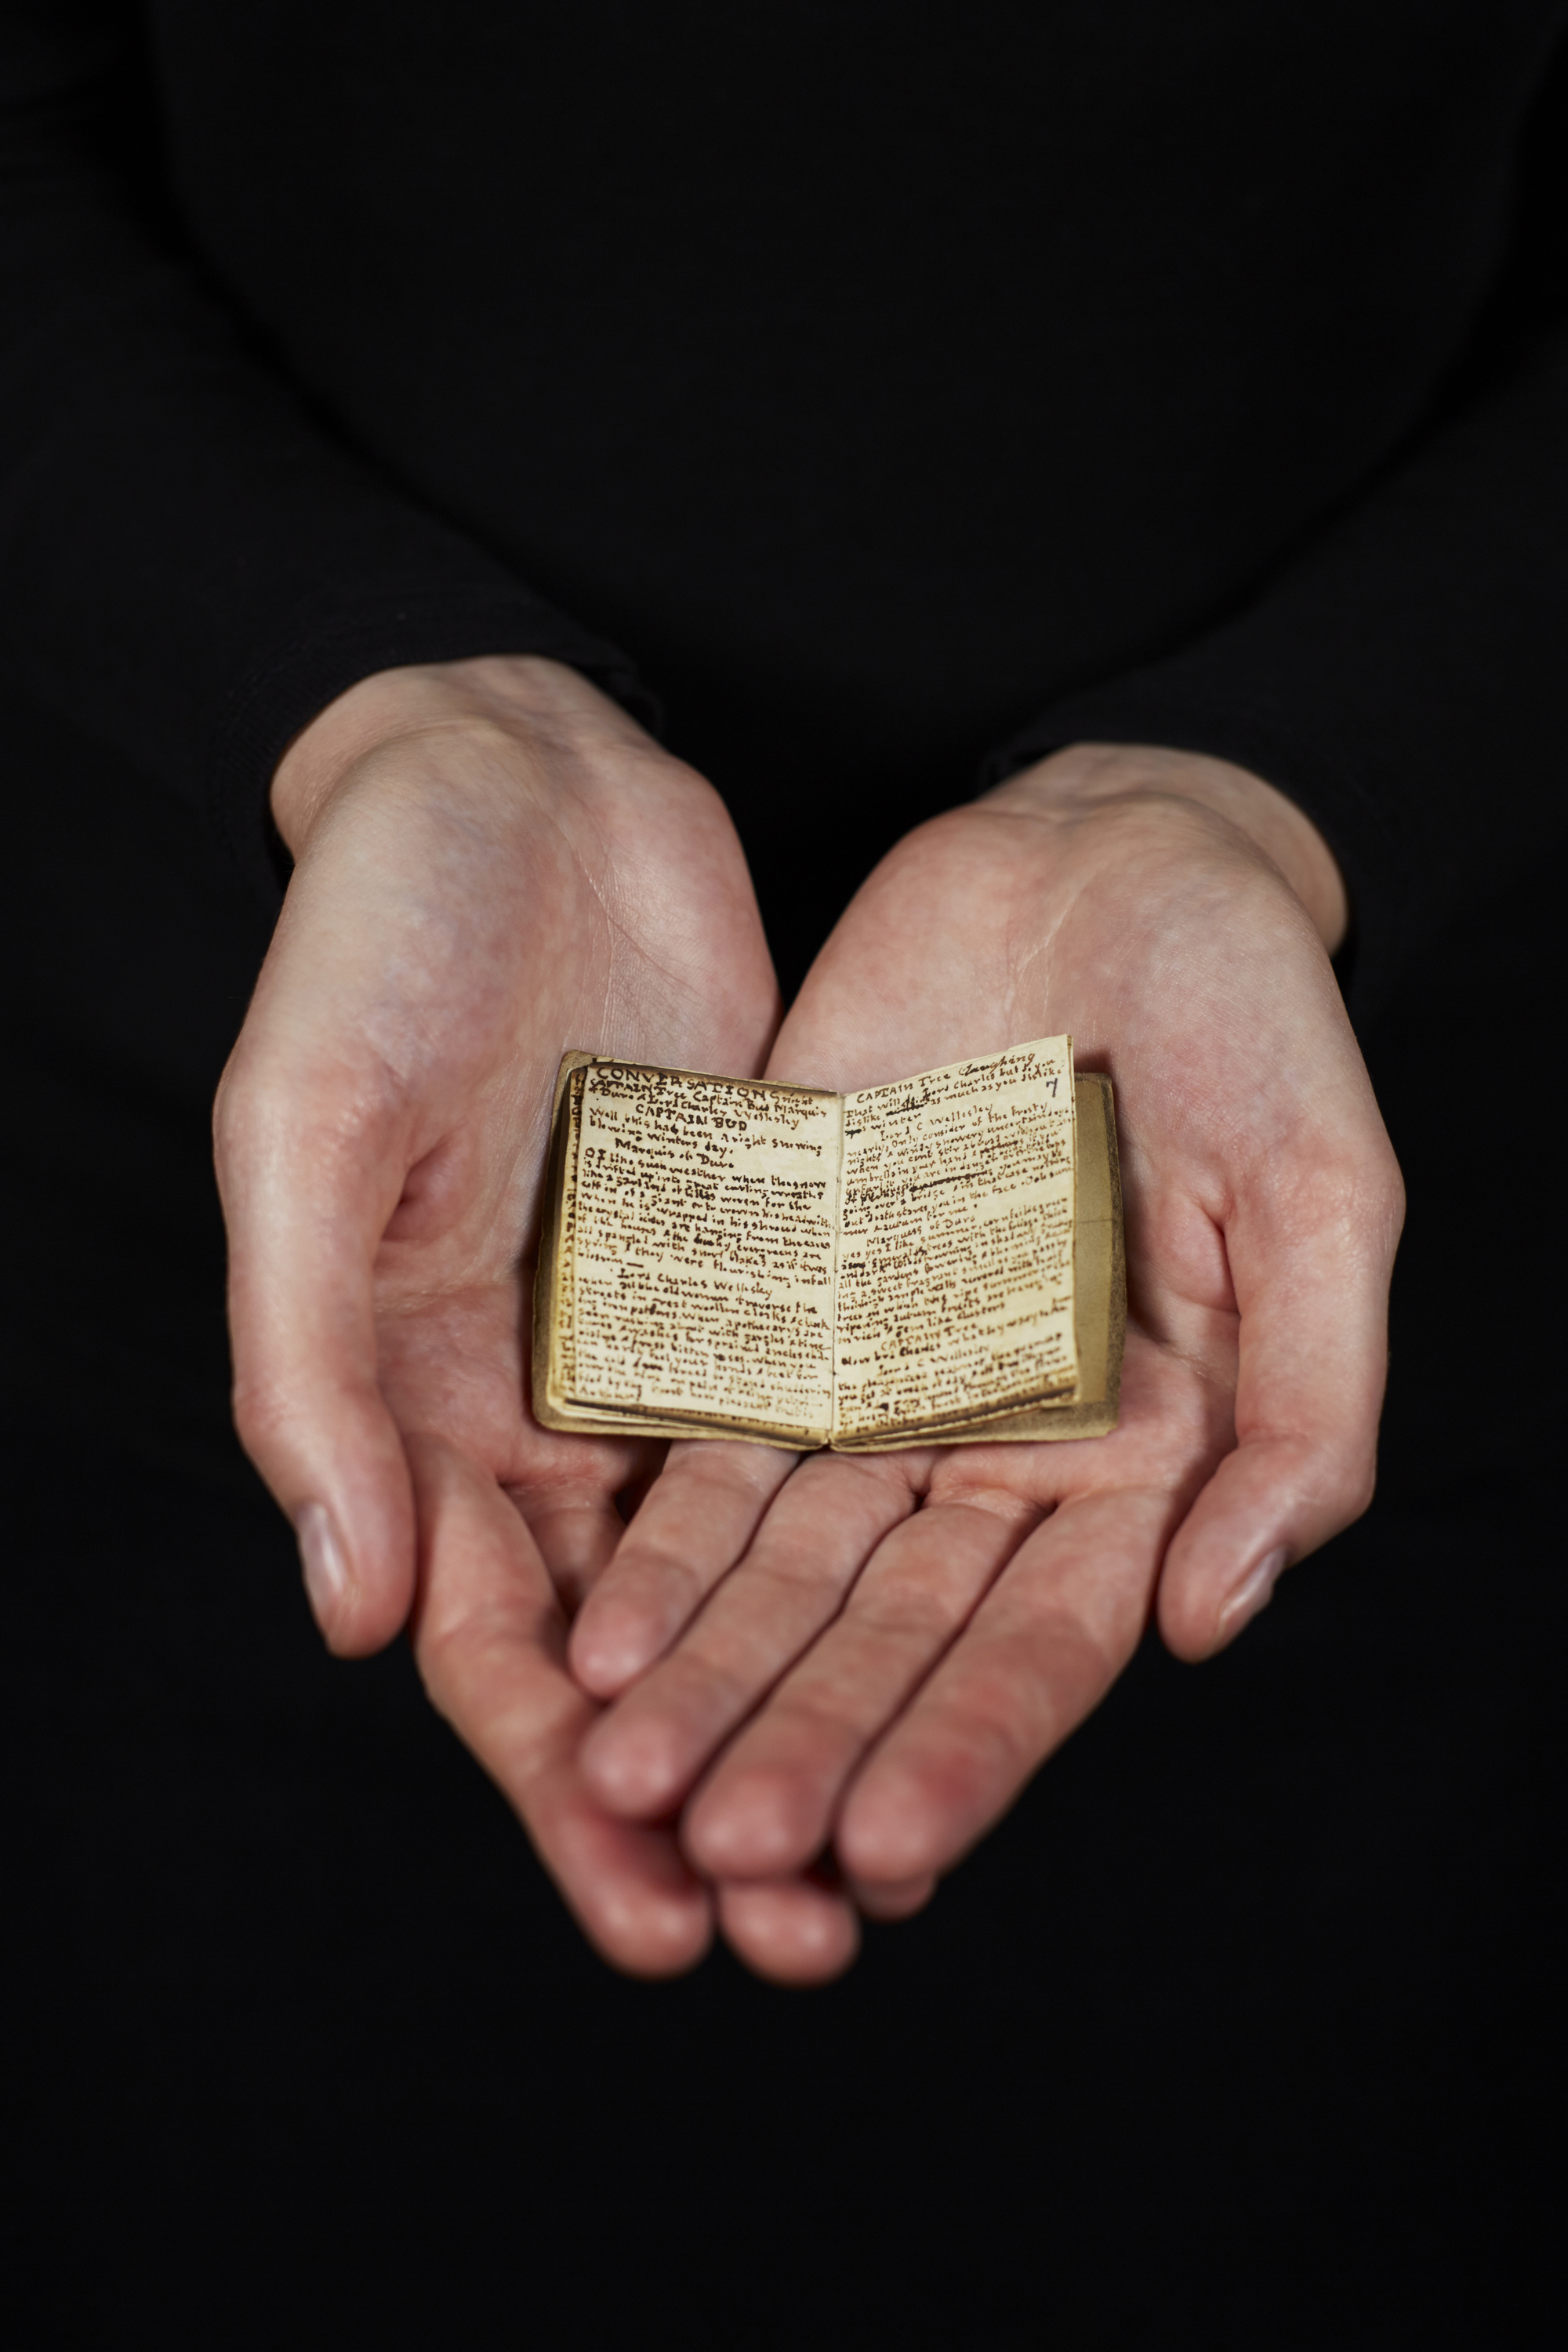 Photograph: Brontë little book, courtesy of The British Library